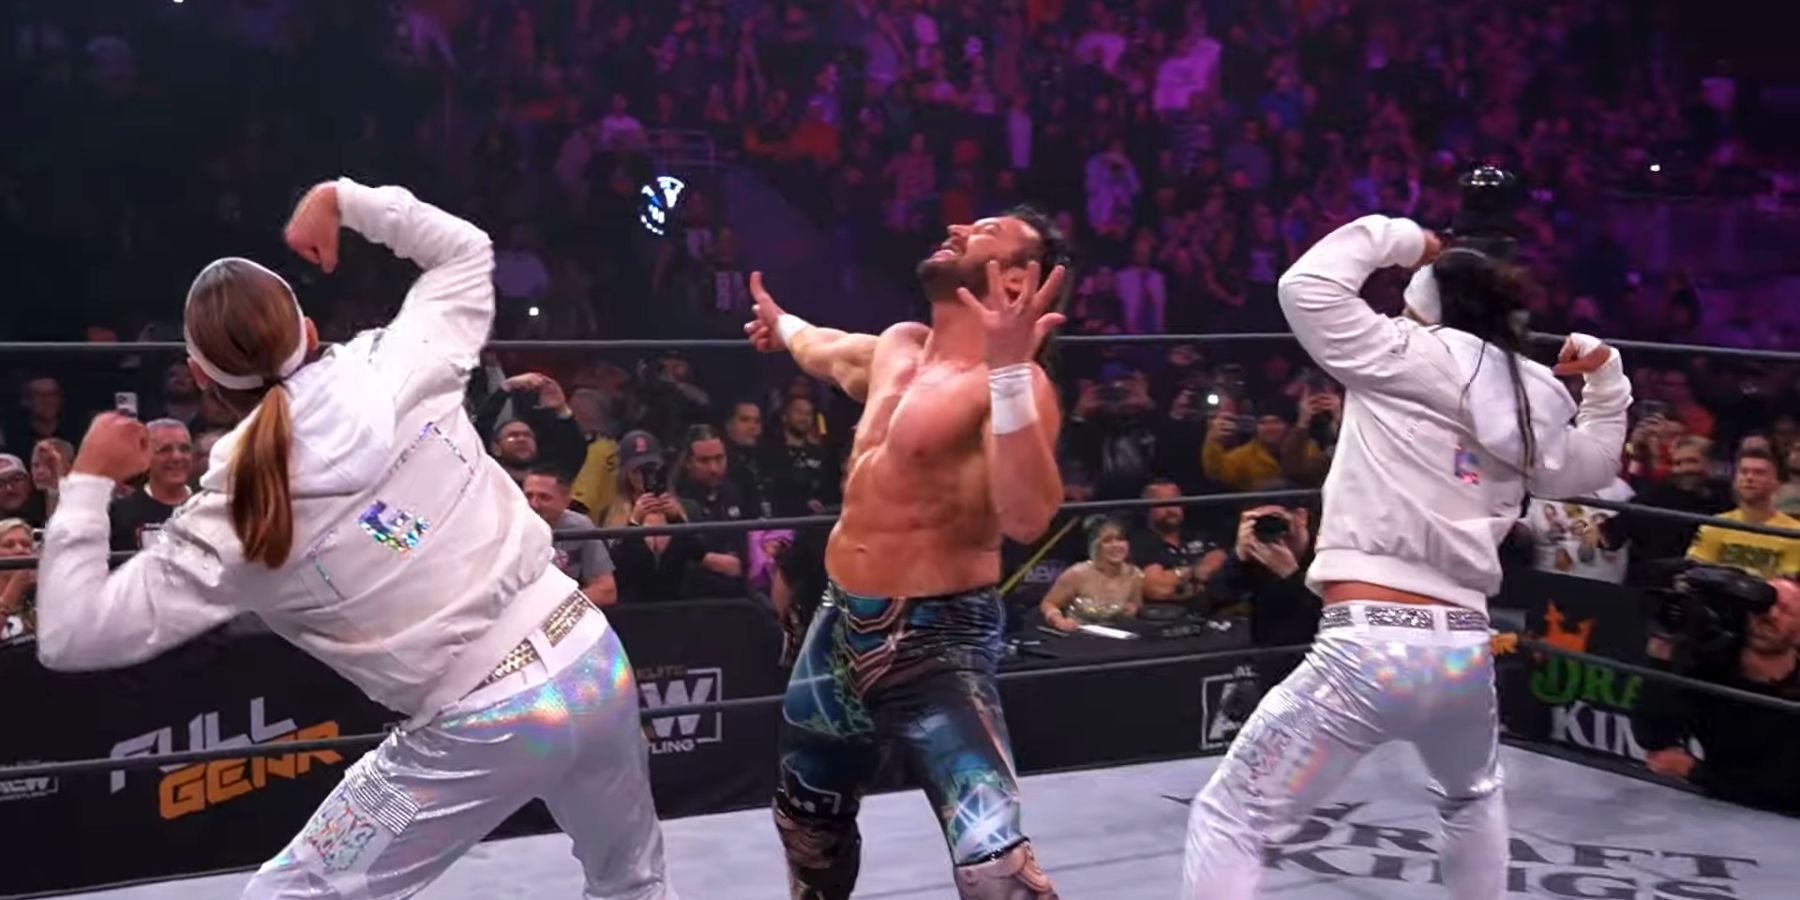 Kenny Omega and The Young Bucks make their long-awaited return at AEW Full Gear.